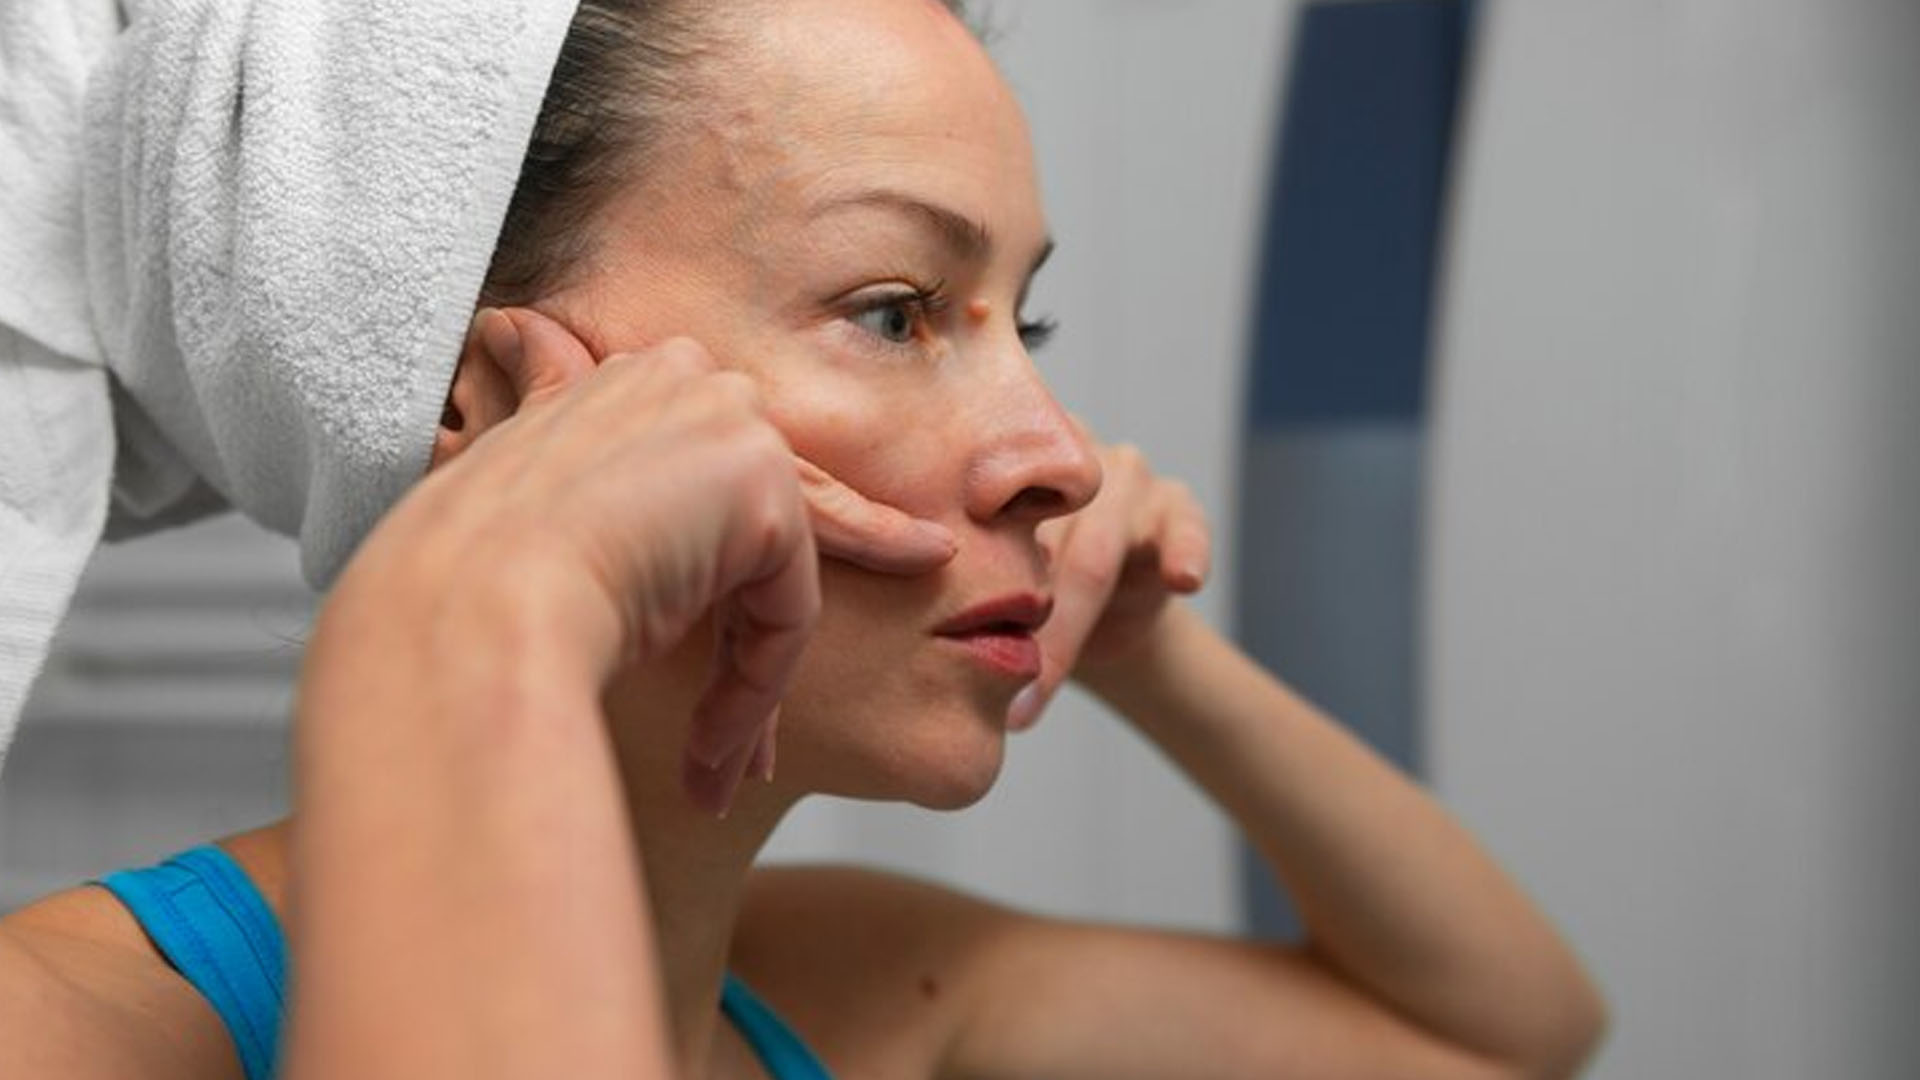 What are the Home Remedies for Face Dryness?